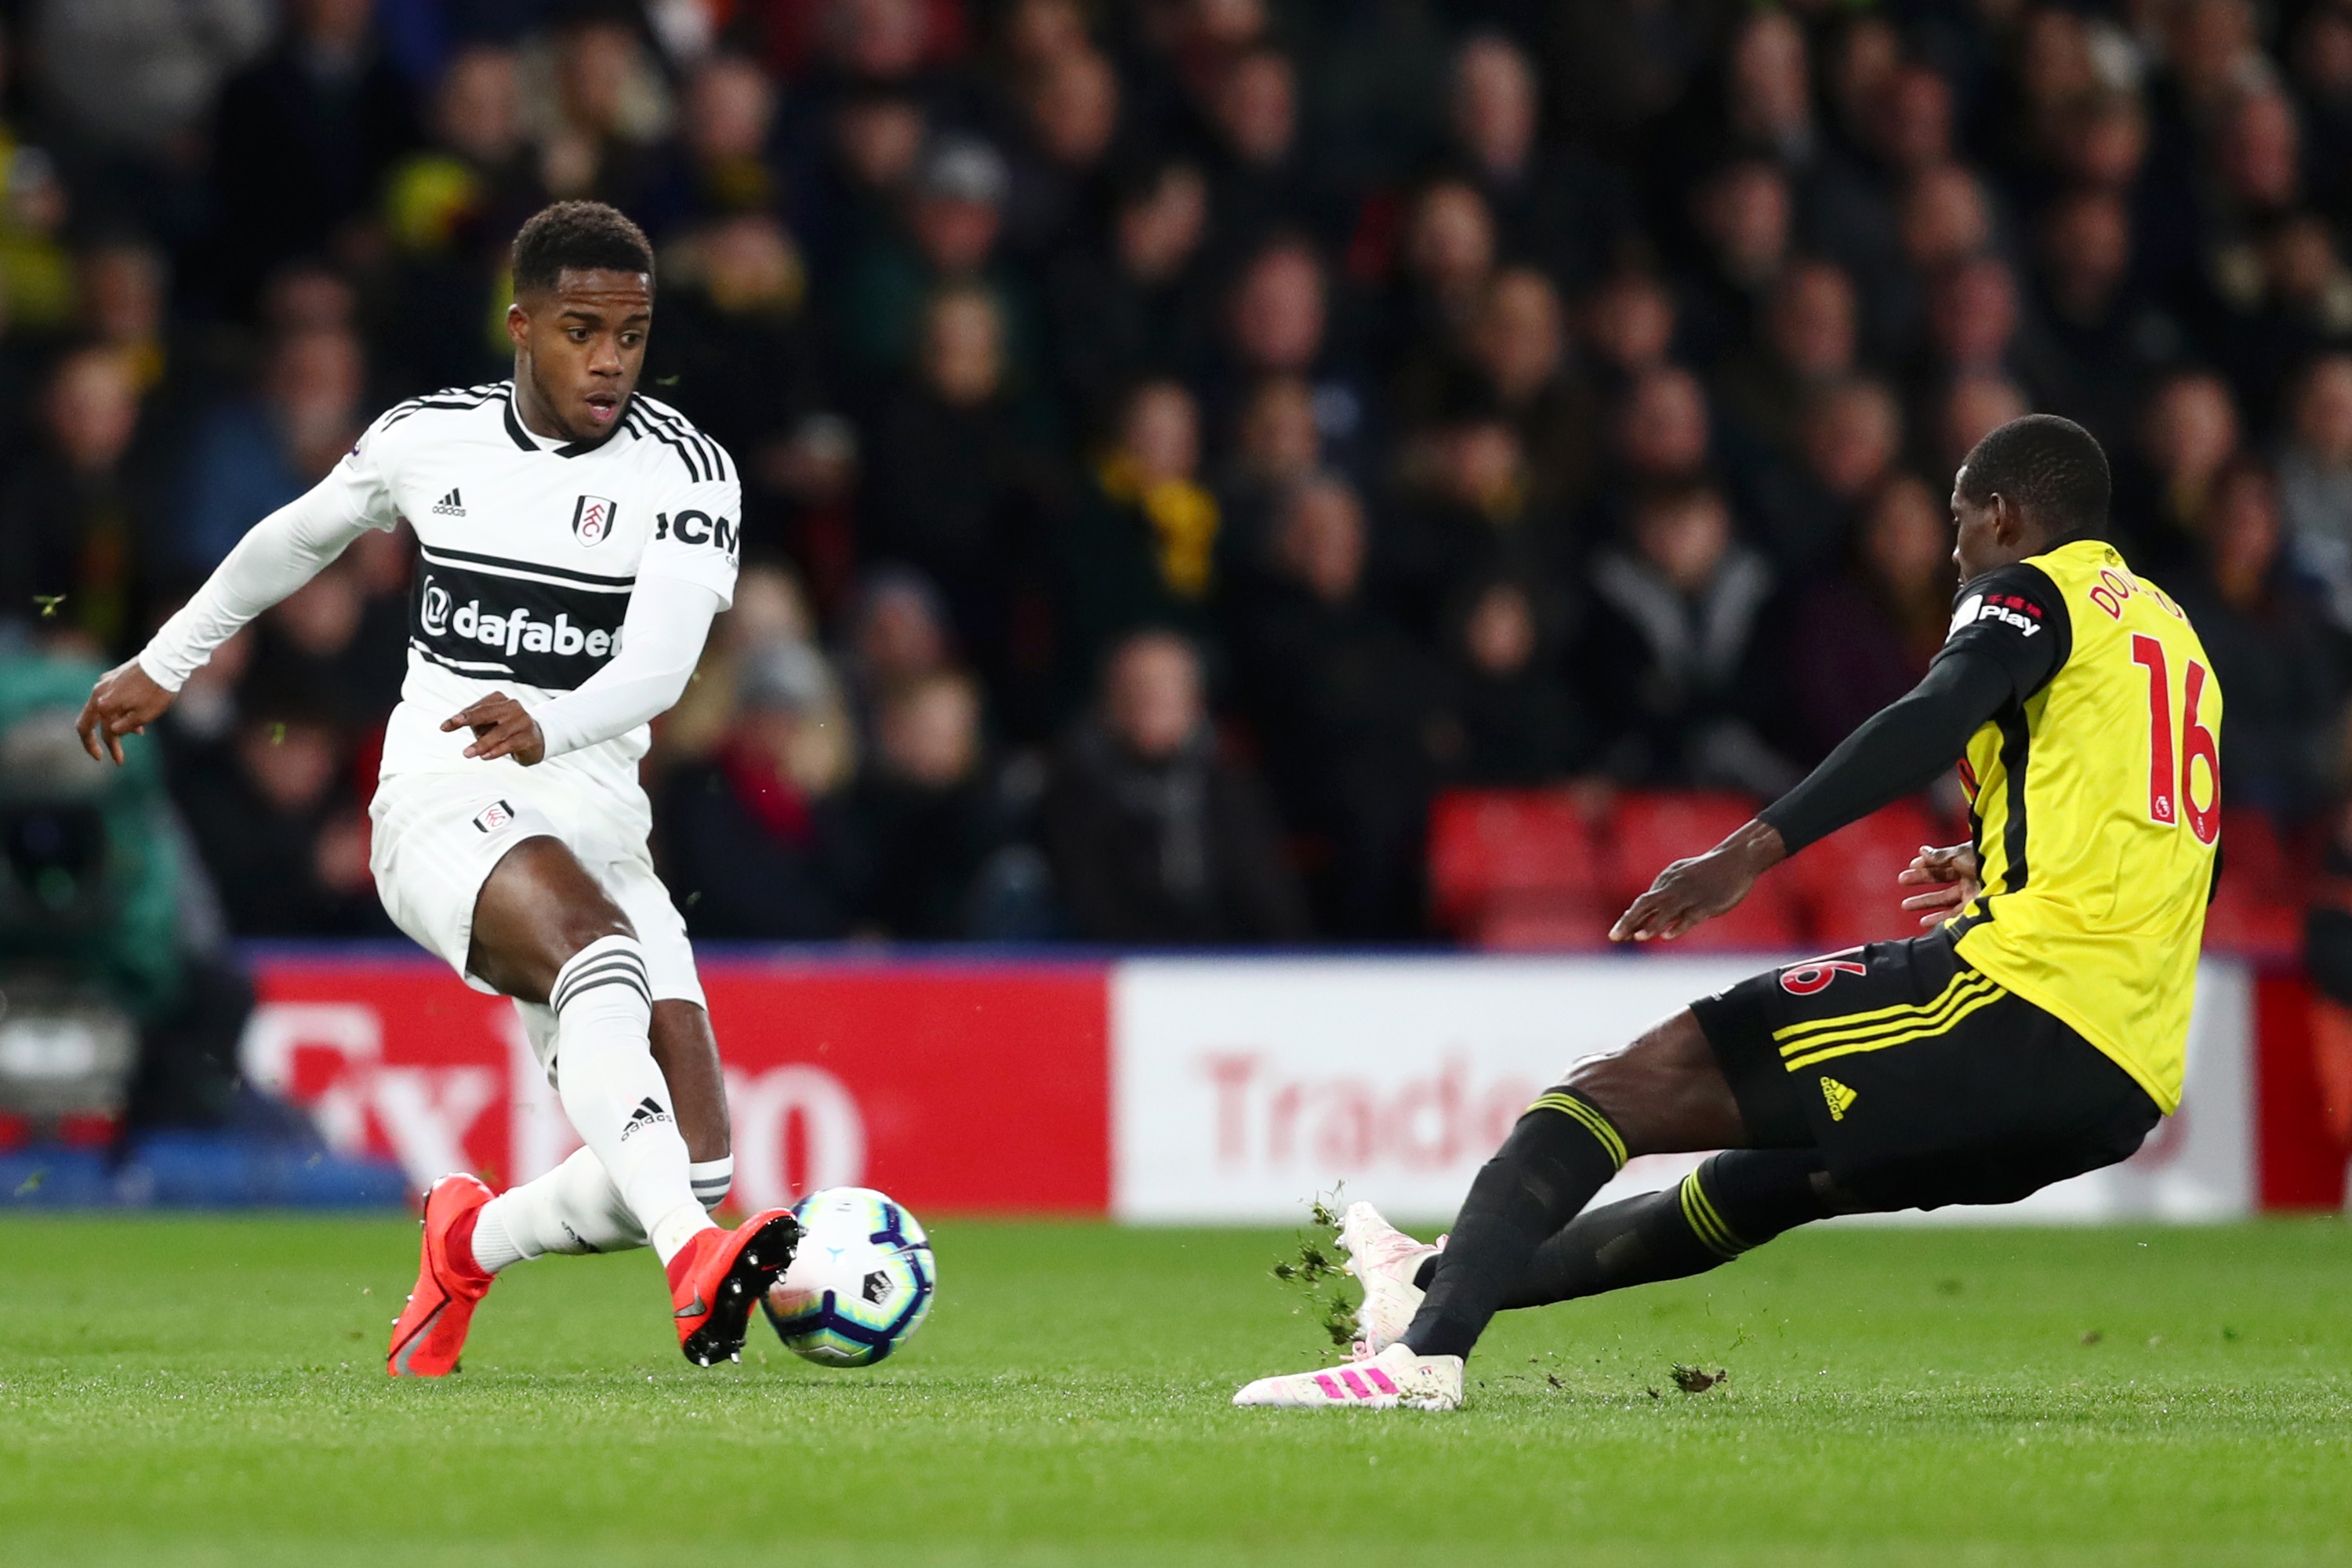 WATFORD, ENGLAND - APRIL 02:  Ryan Sessegnon of Fulham is challenged by Abdoulaye Doucoure of Watford during the Premier League match between Watford FC and Fulham FC at Vicarage Road on April 02, 2019 in Watford, United Kingdom. (Photo by Dan Istitene/Getty Images)